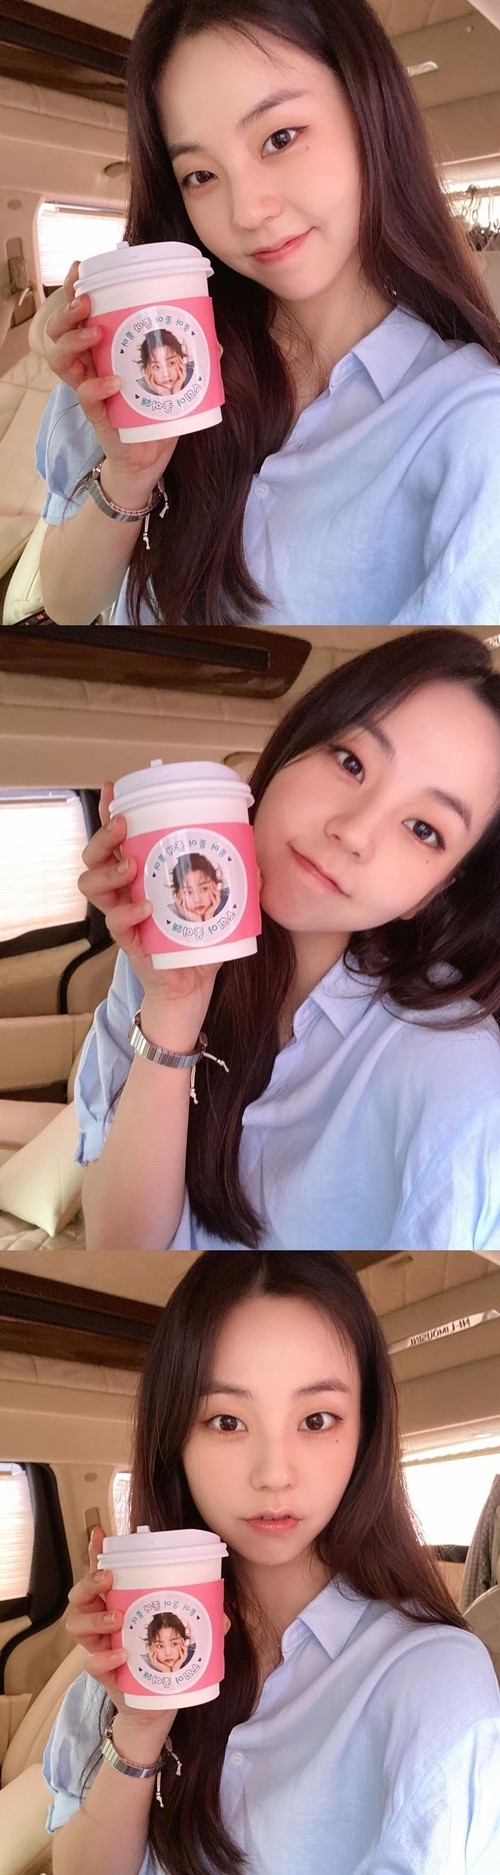 ahn-so-hee-selfie-thank-to-fans-supporting-coffee-truck-1